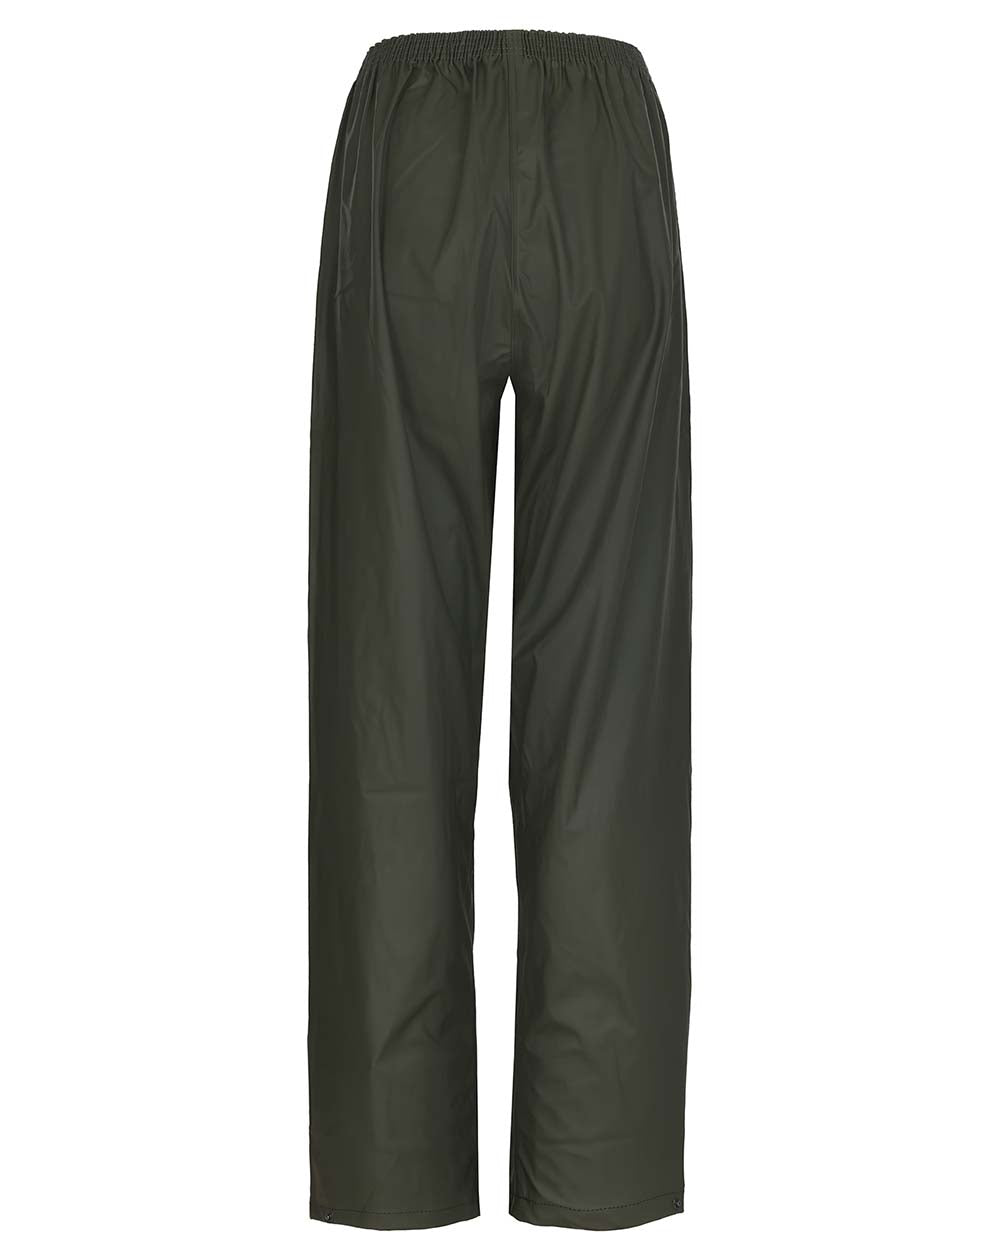 Olive Coloured Fort Airflex Waterproof Breathable Trousers On A White Background 